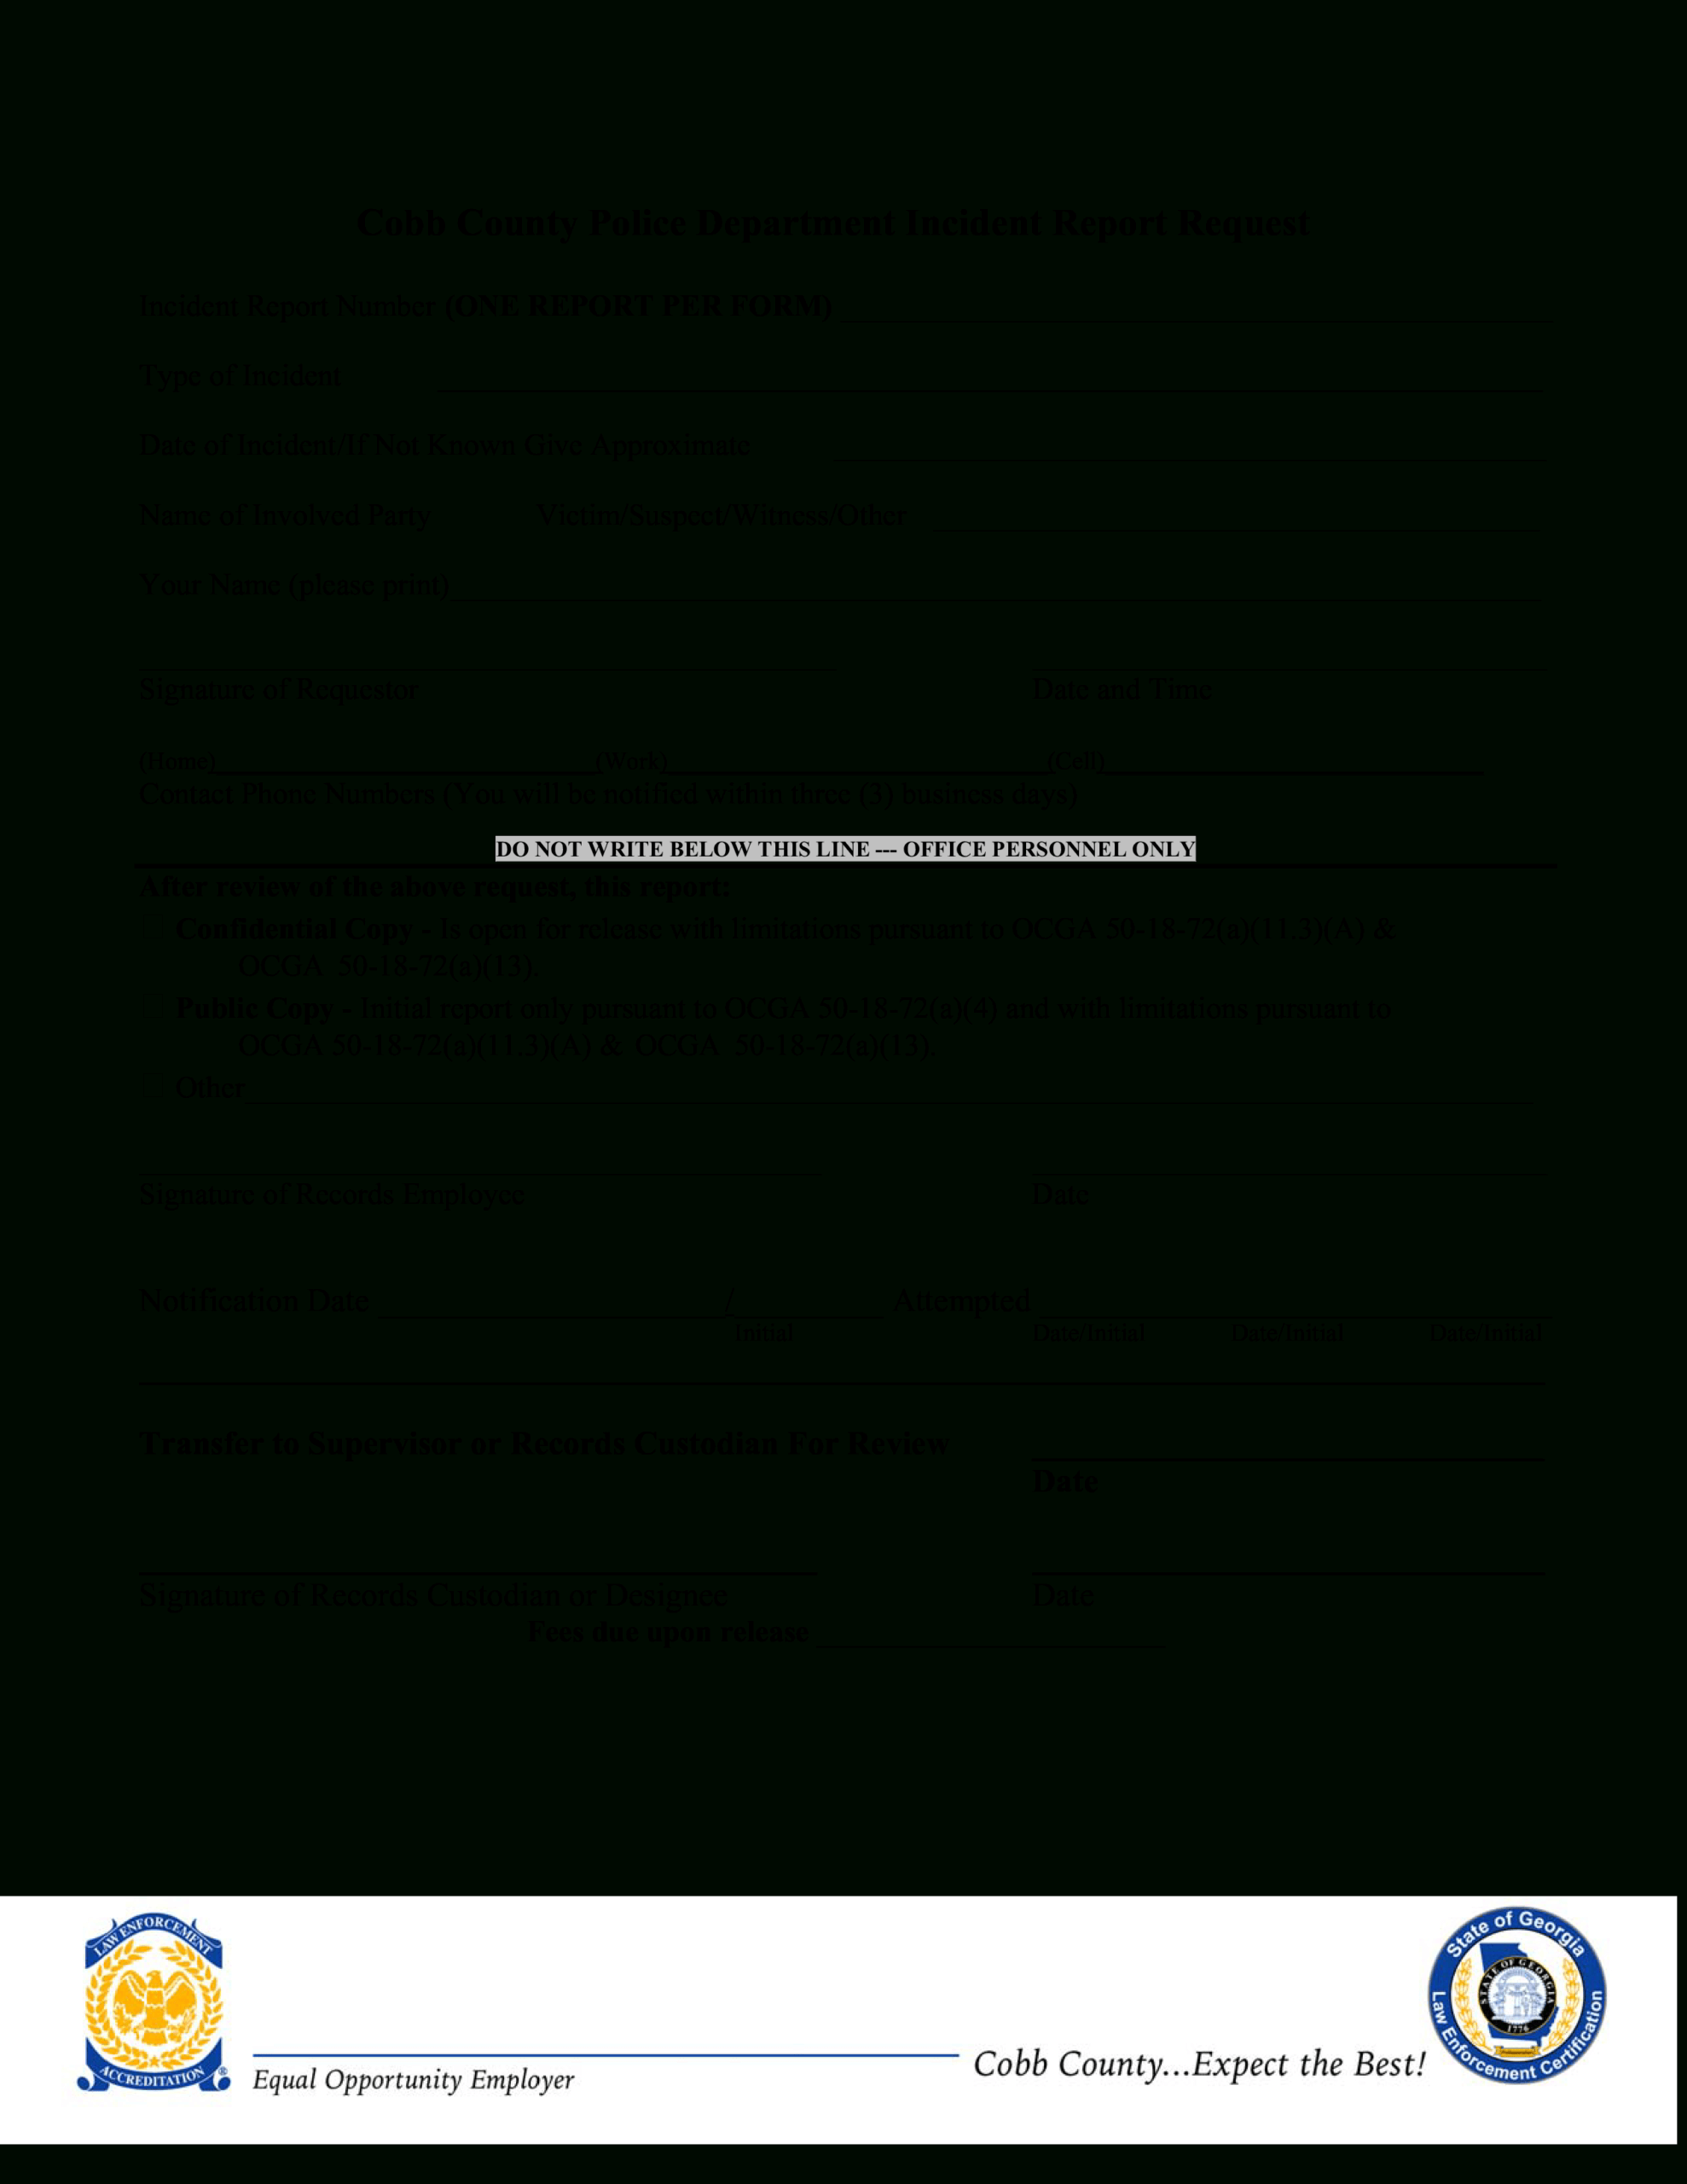 Blank Police Incident Report | Templates At Regarding Police Incident Report Template